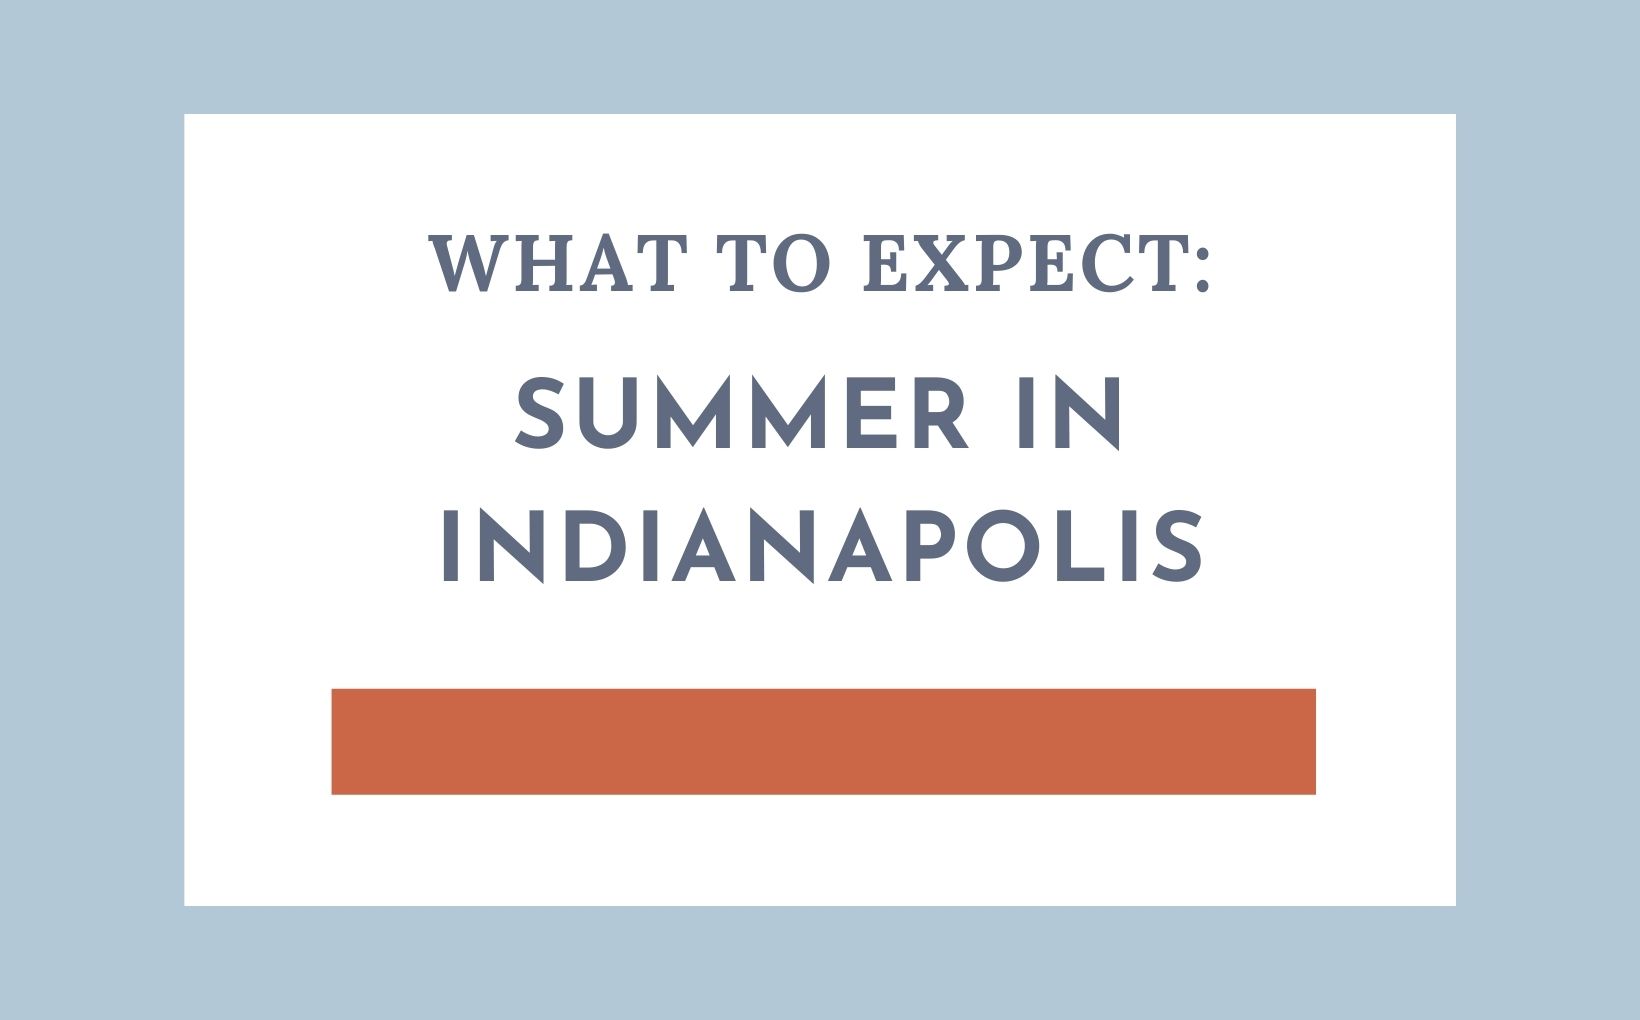 What is Summer like in Indianapolis feature image